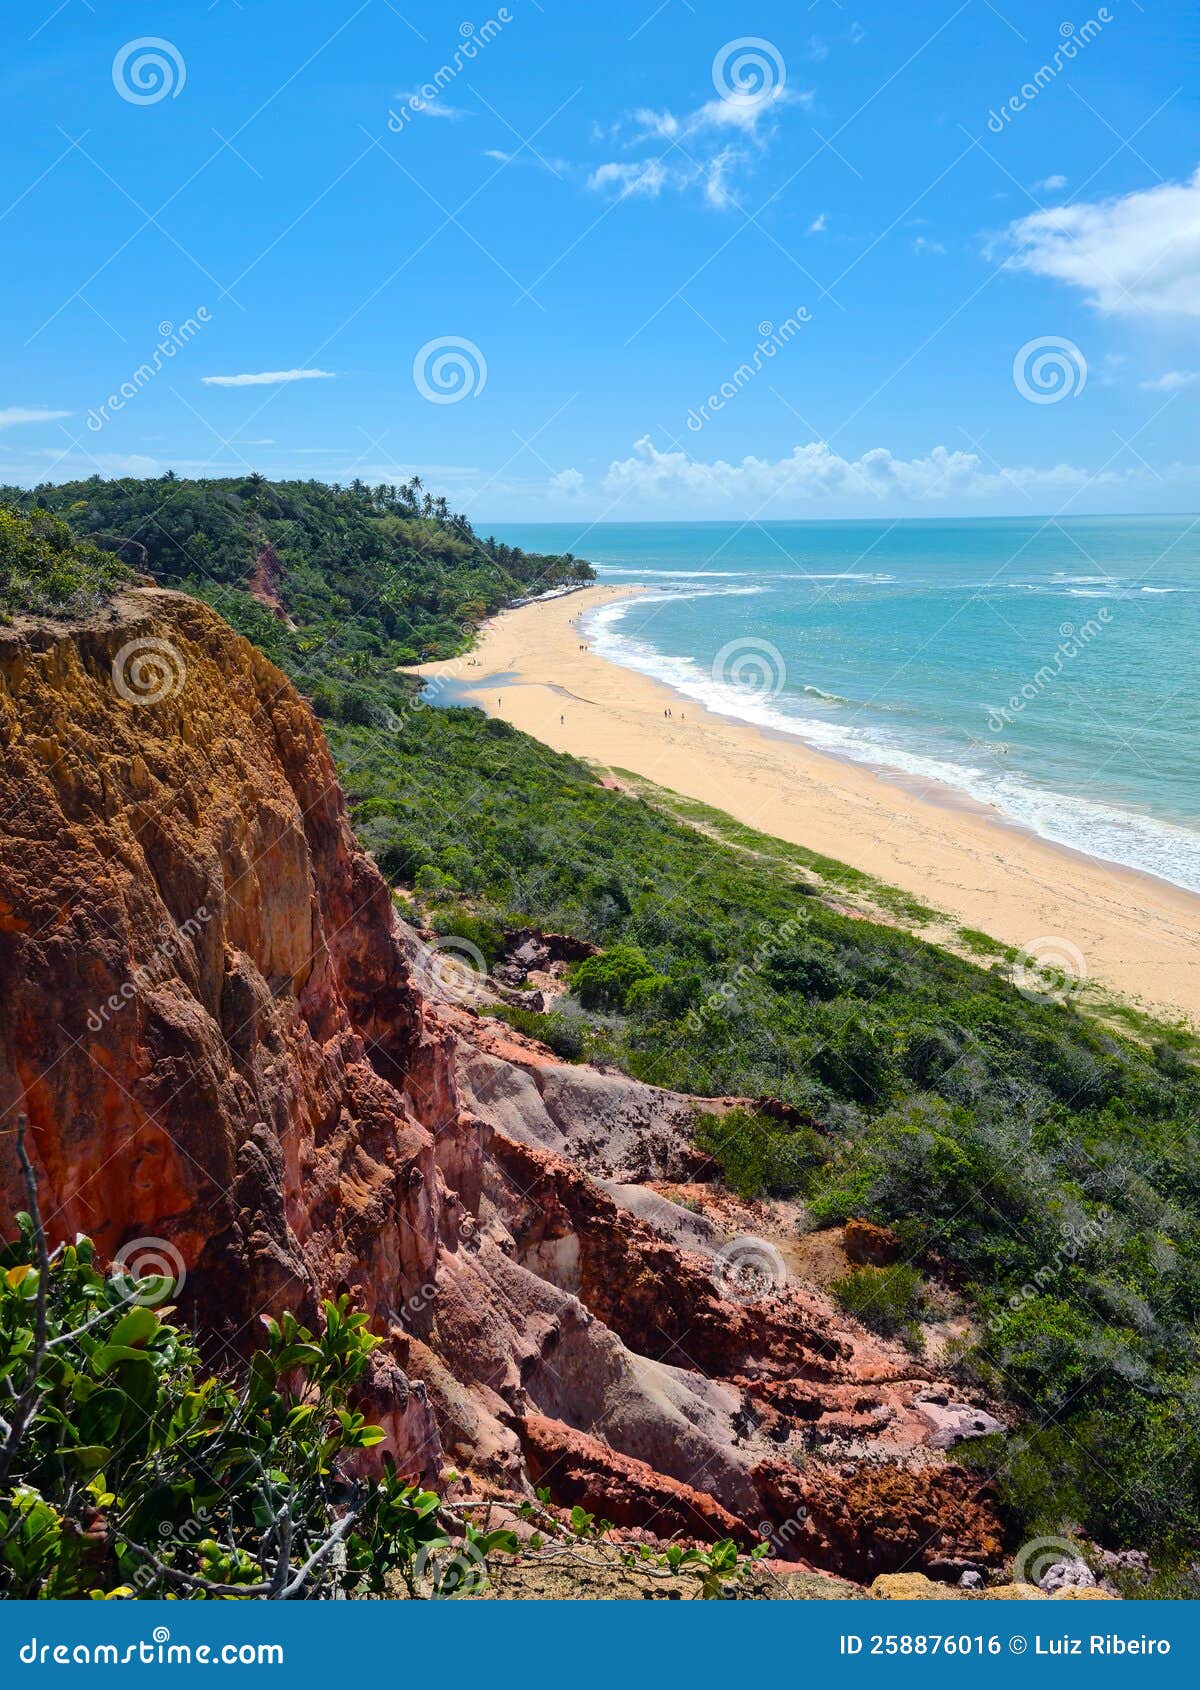 arraial d`ajuda is a district of the brazilian municipality of porto seguro, on the coast of the state of bahia, cliff